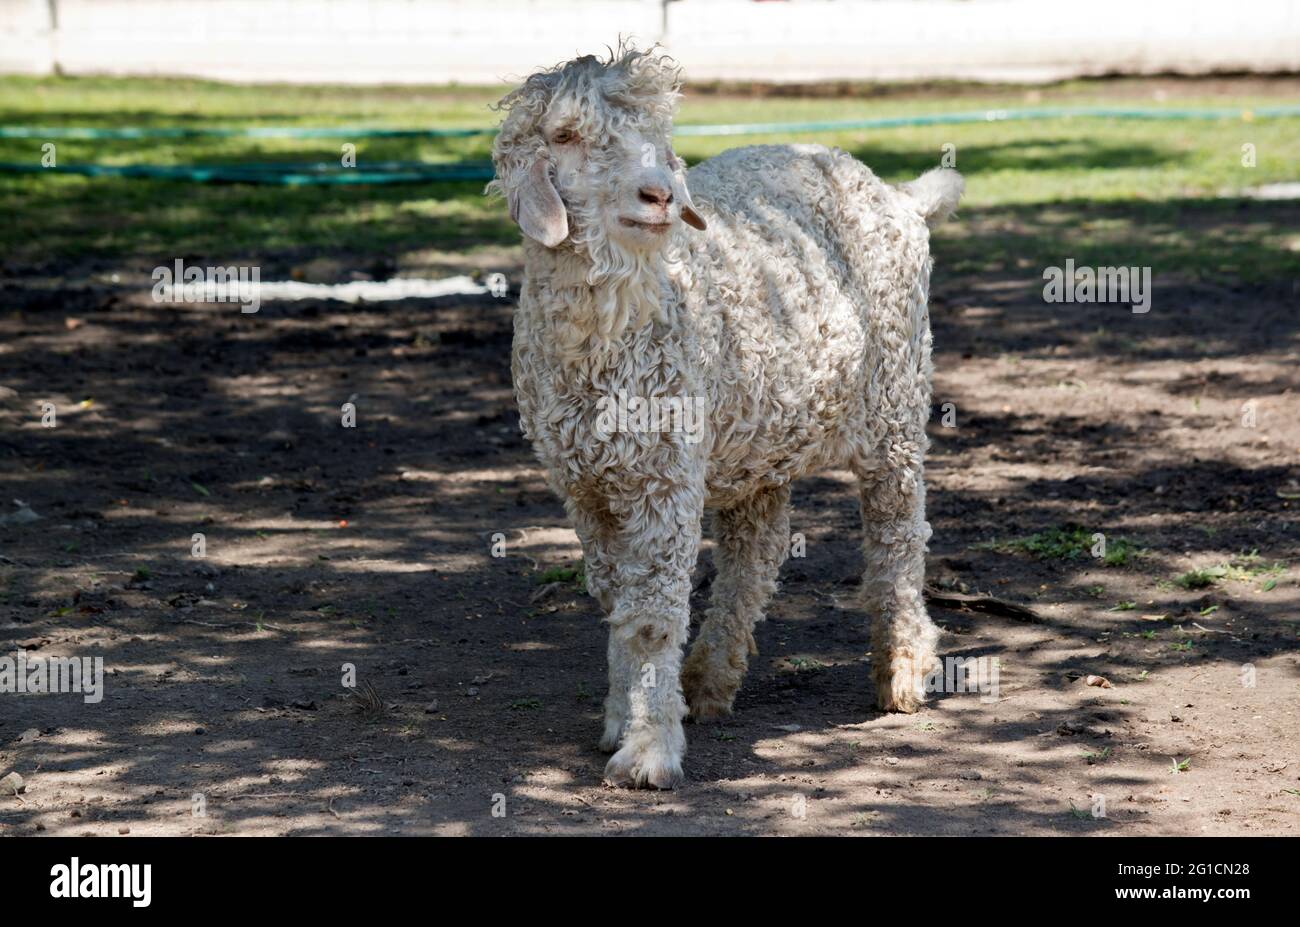 the angora goat is in the shade on the hot day Stock Photo